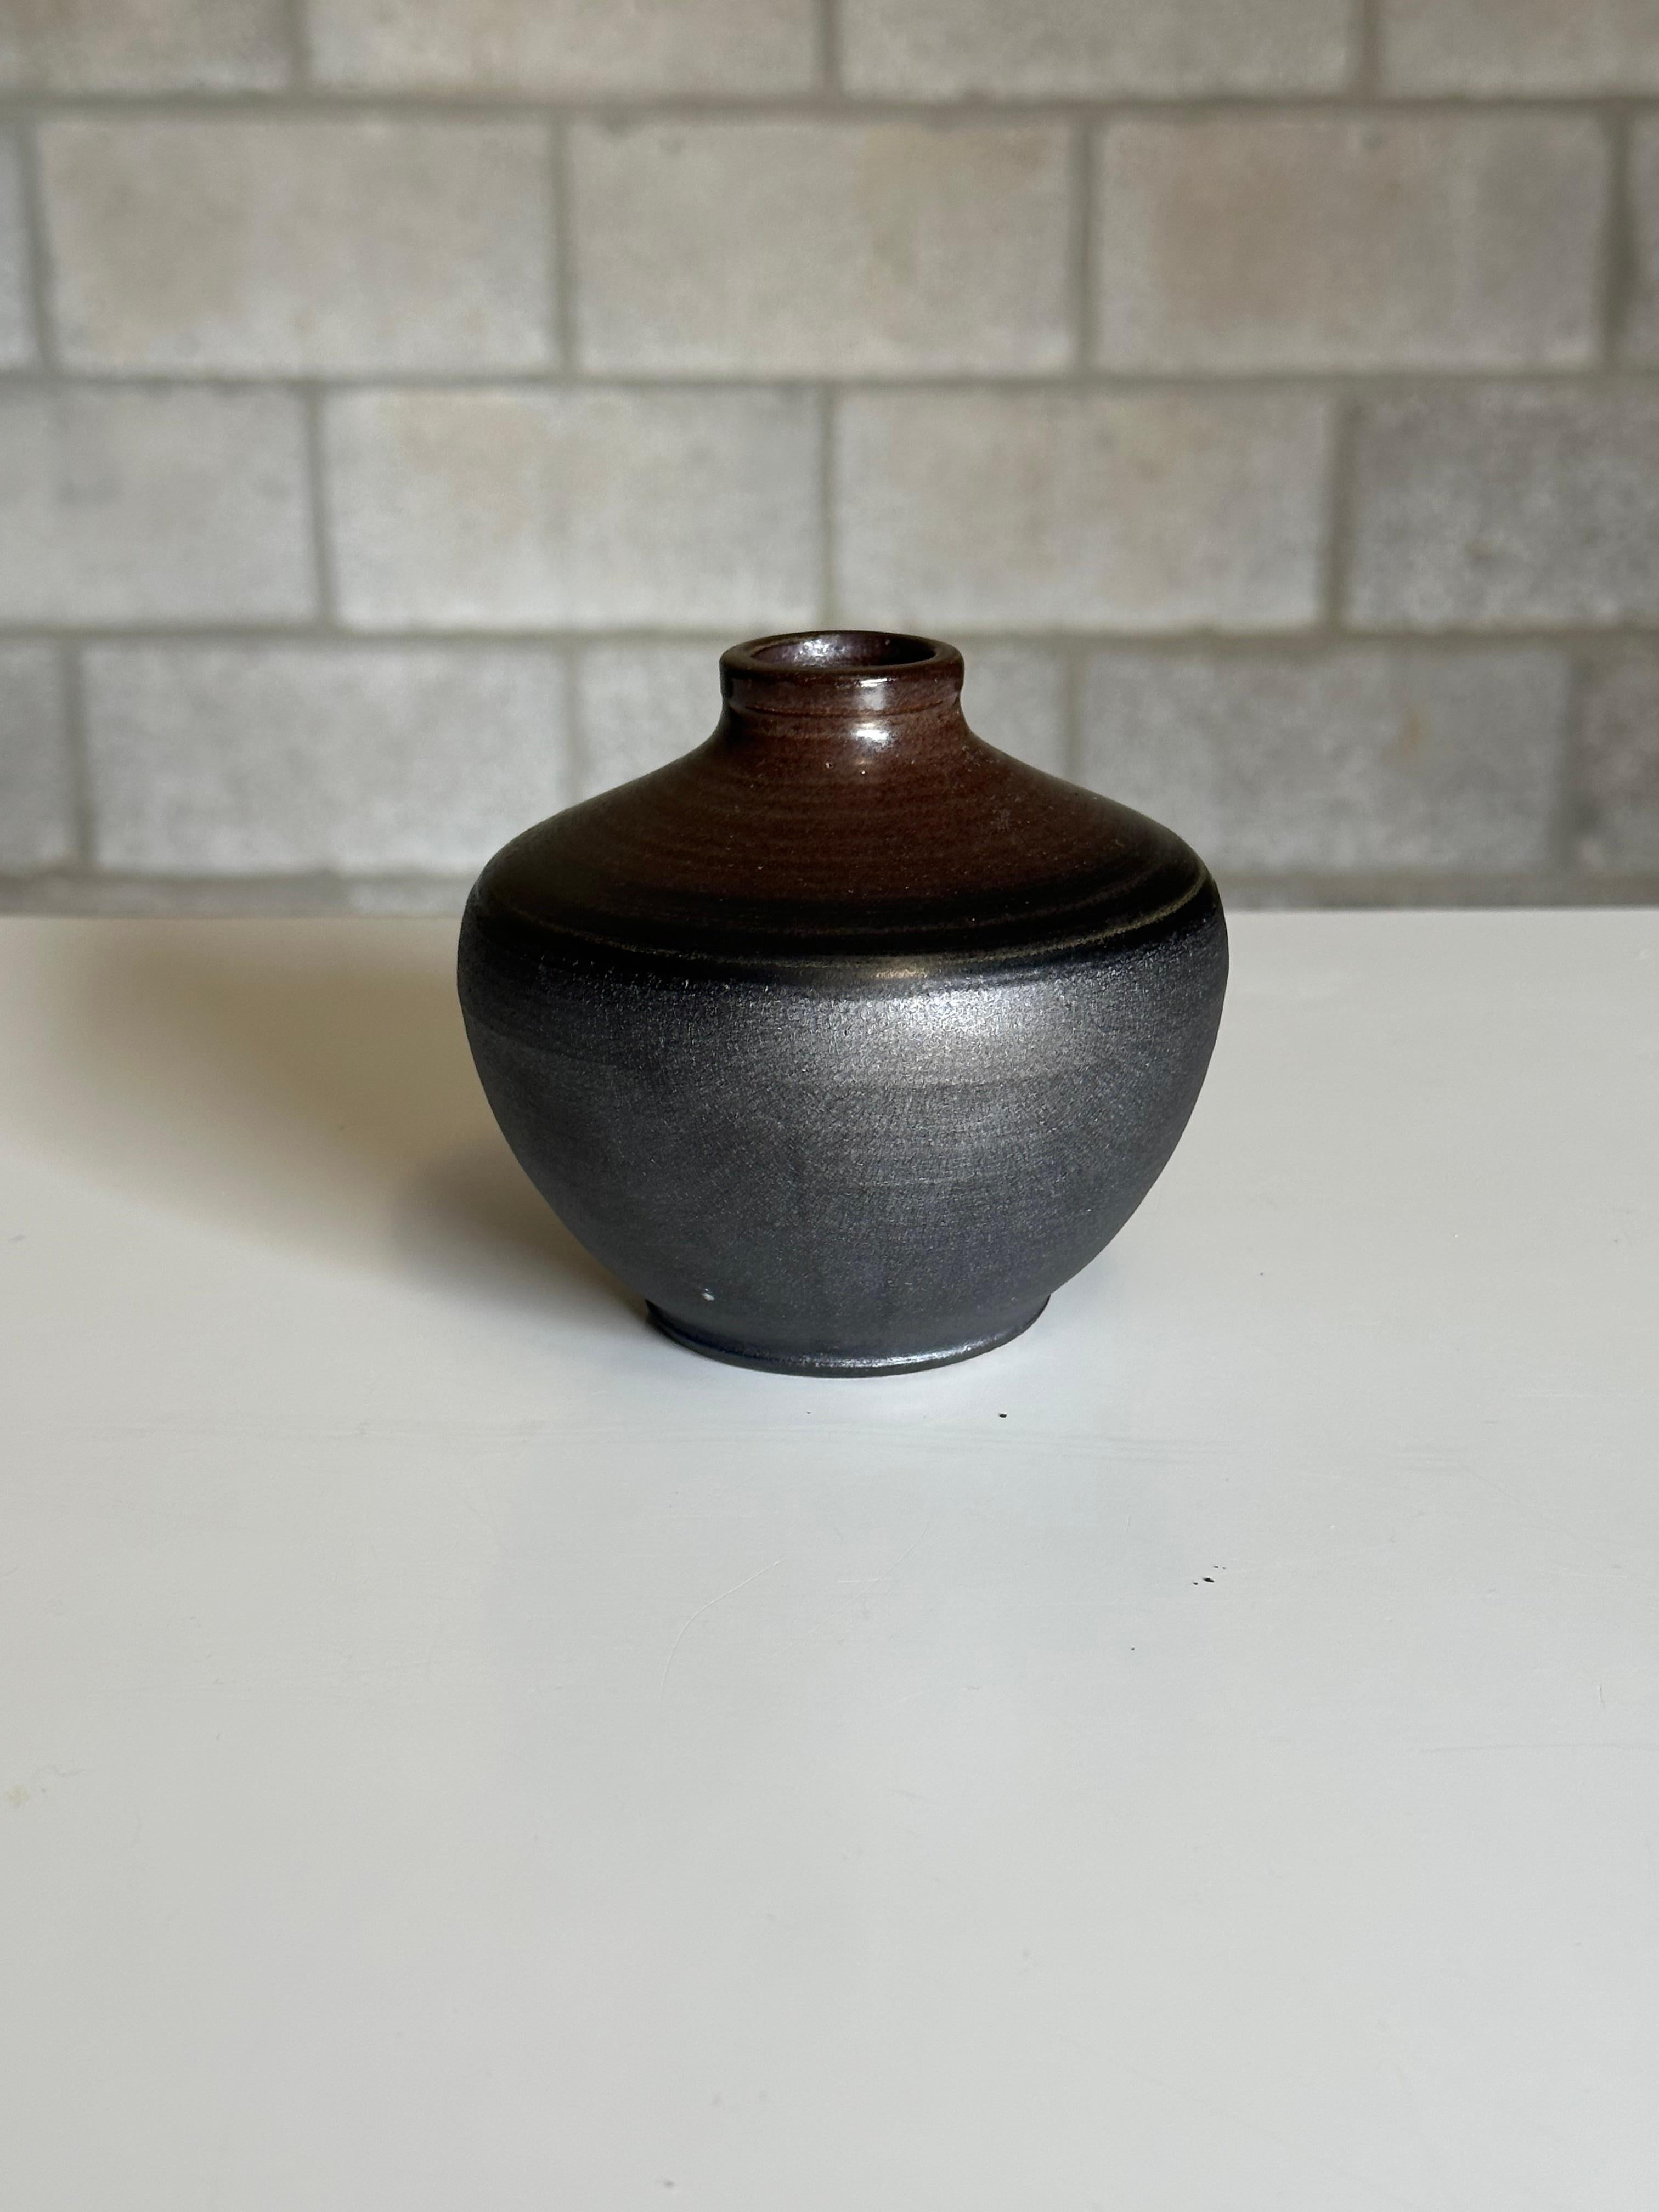 A stoneware vase designed by Arthur Andersson for Wallåkra, circa 1950s. Features an exciting glaze which starts as a rough flat black towards the bottom and moves into a glazed black with some dark brown near rim. Very heavy well made piece